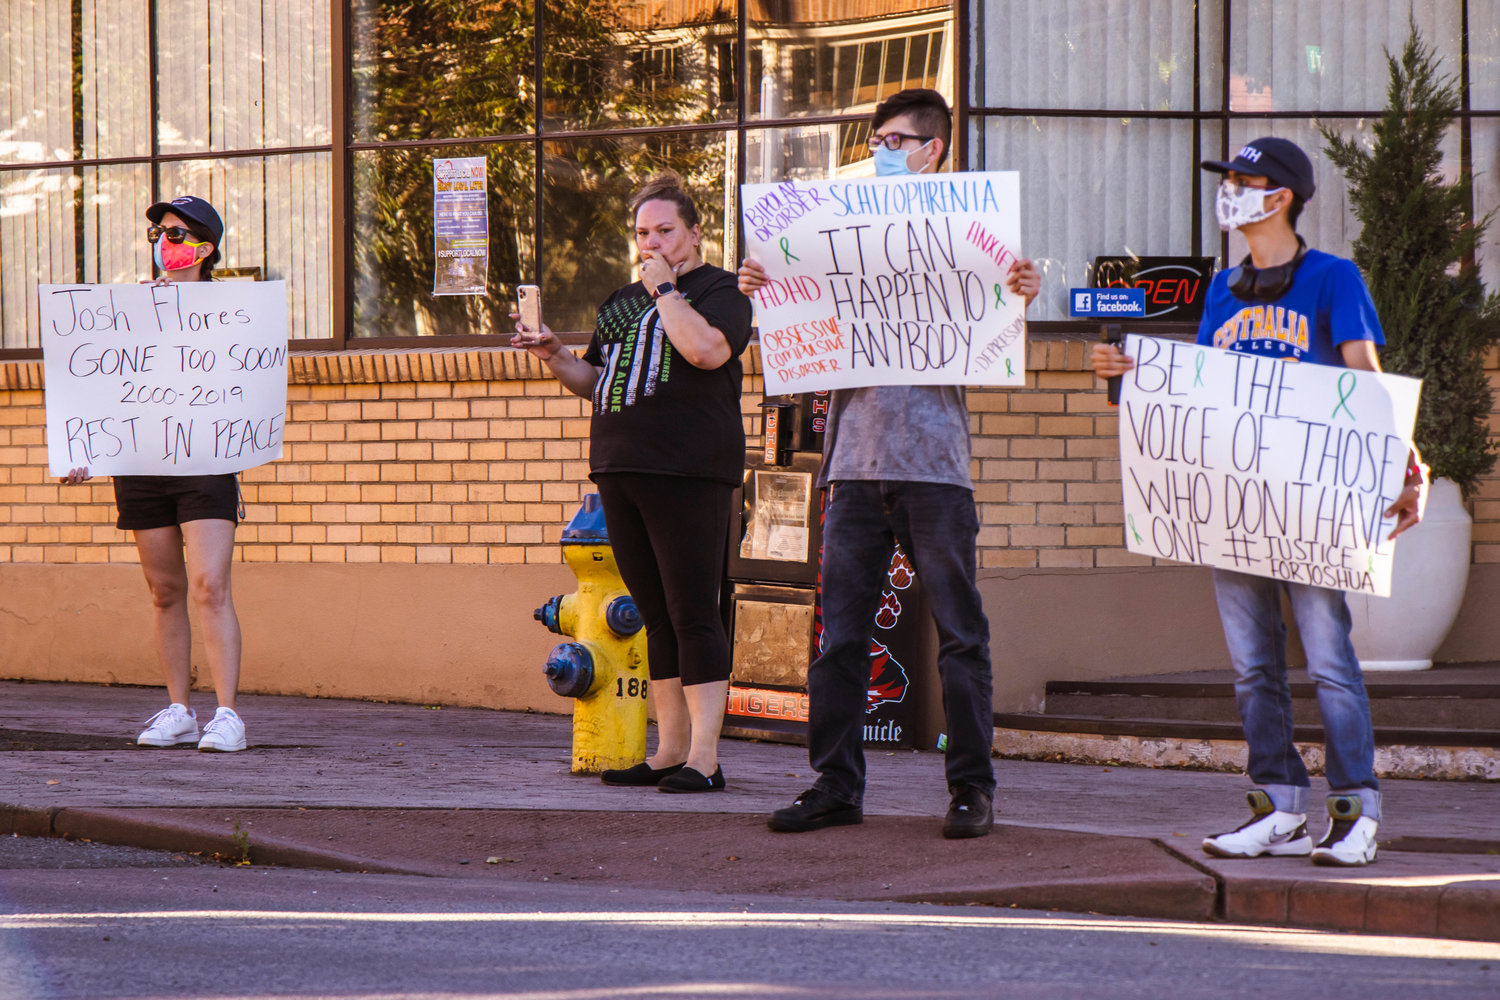 Demonstrators gather outside the Centralia Police Station Monday afternoon to honor the life of Joshua Flores who died on June 18, 2019 at the age of 18.